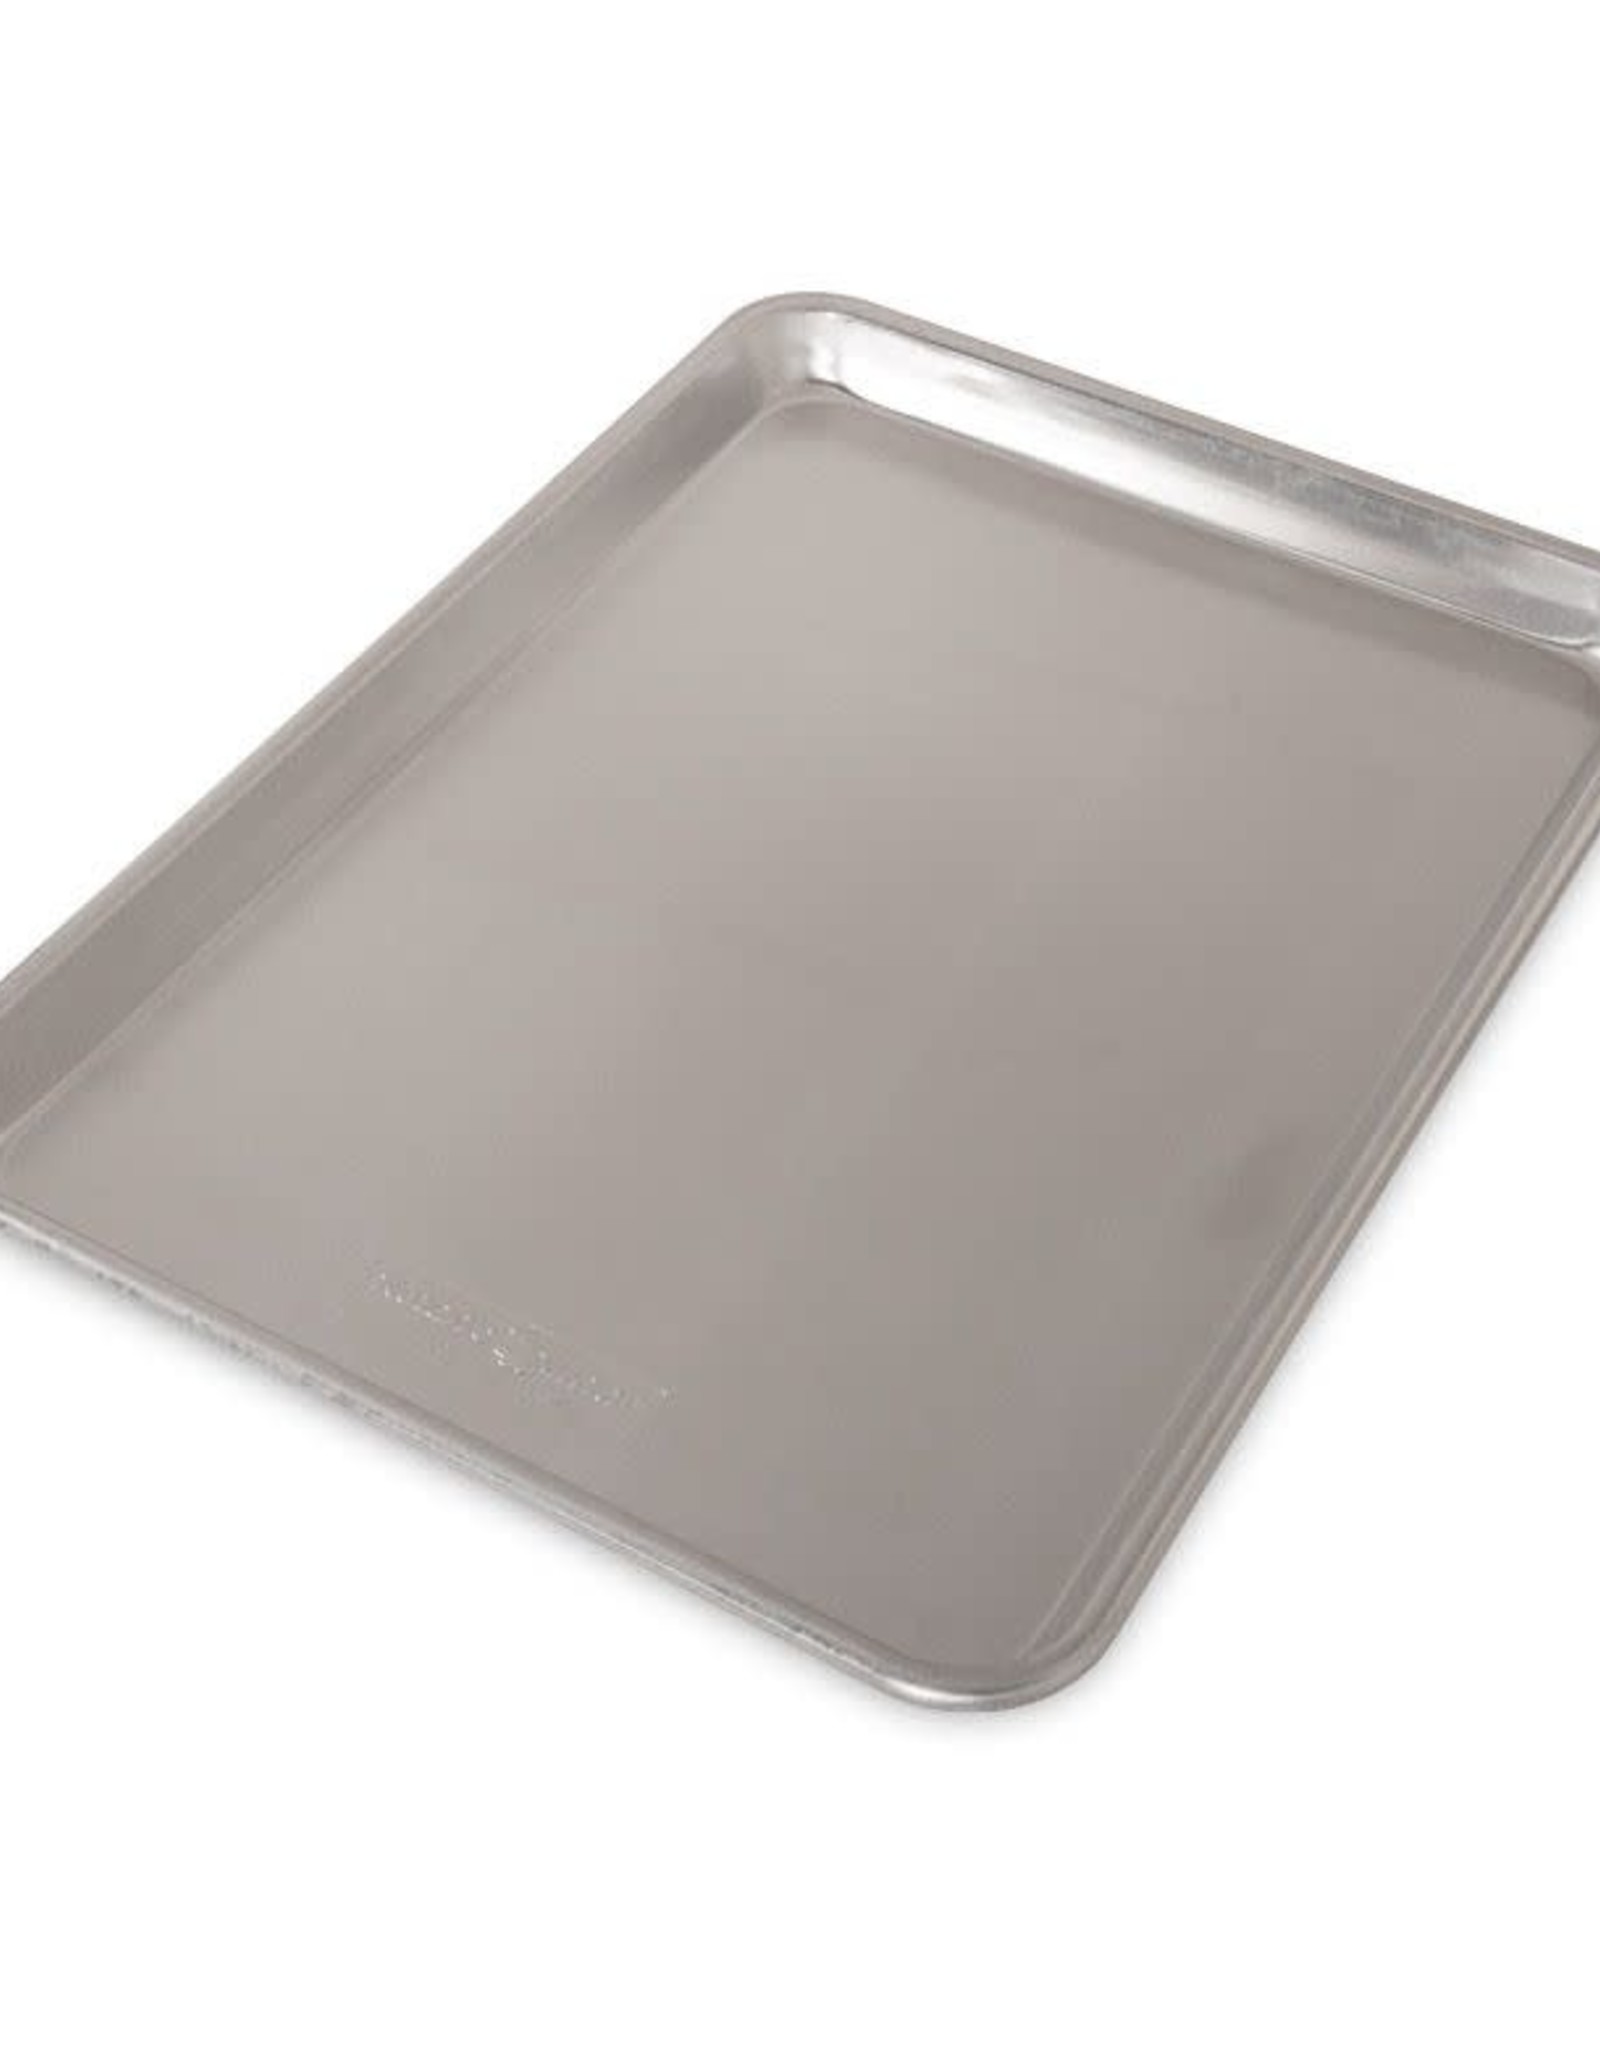 Nordic Ware Jelly Roll Pan (15 x 10)